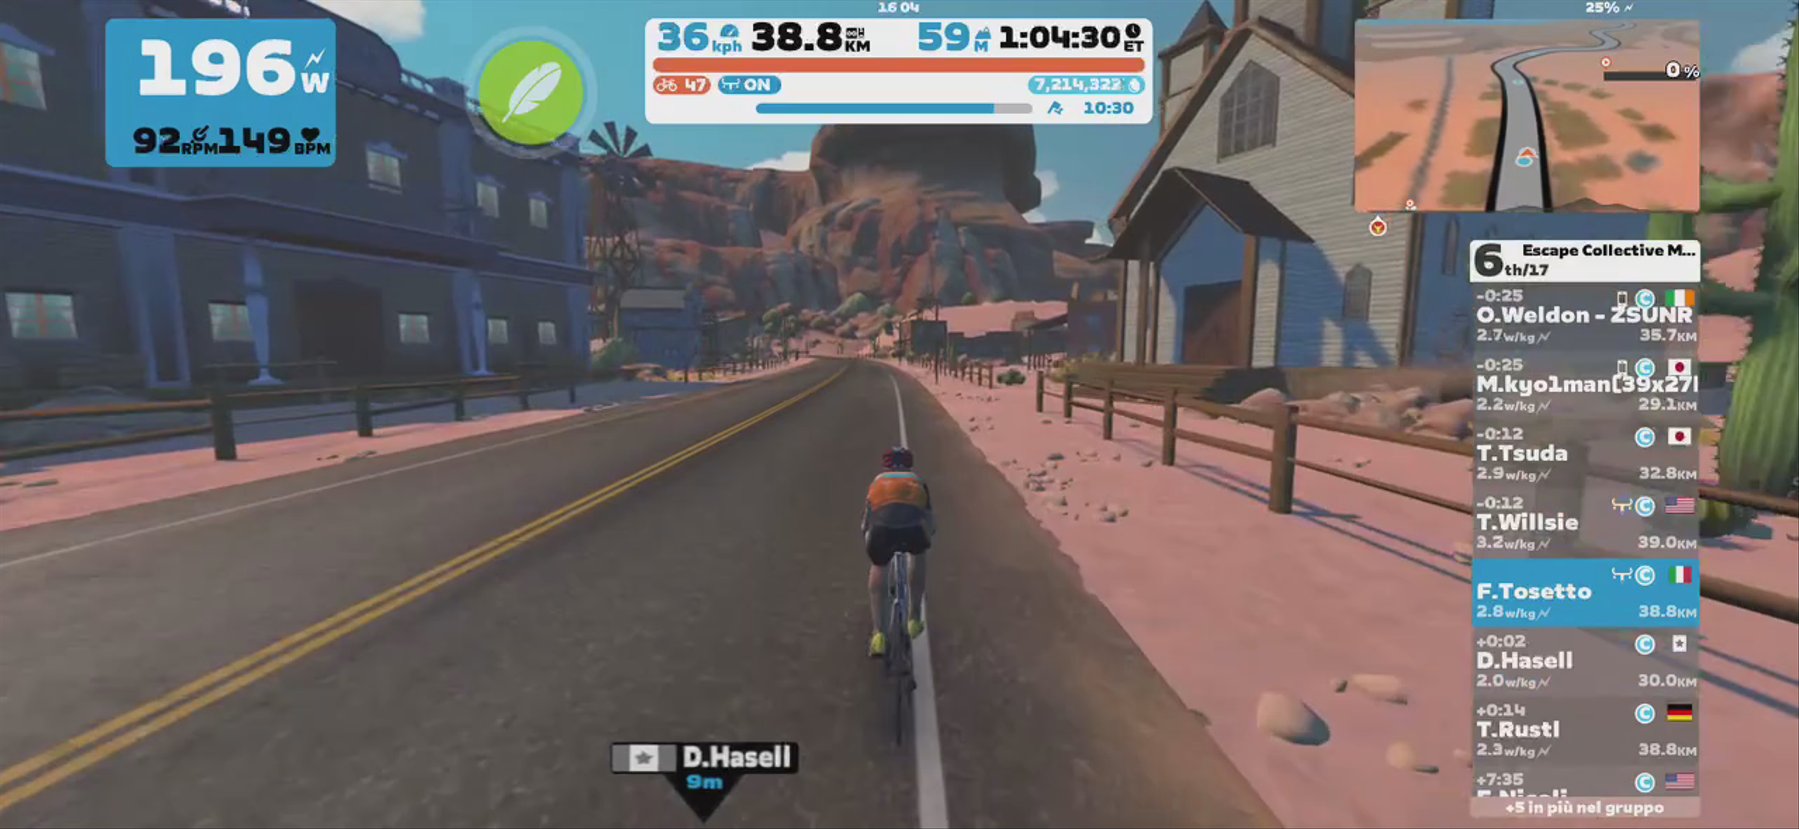 Zwift - Group Ride: Escape Collective Monday Meander (C) on Tempus Fugit in Watopia